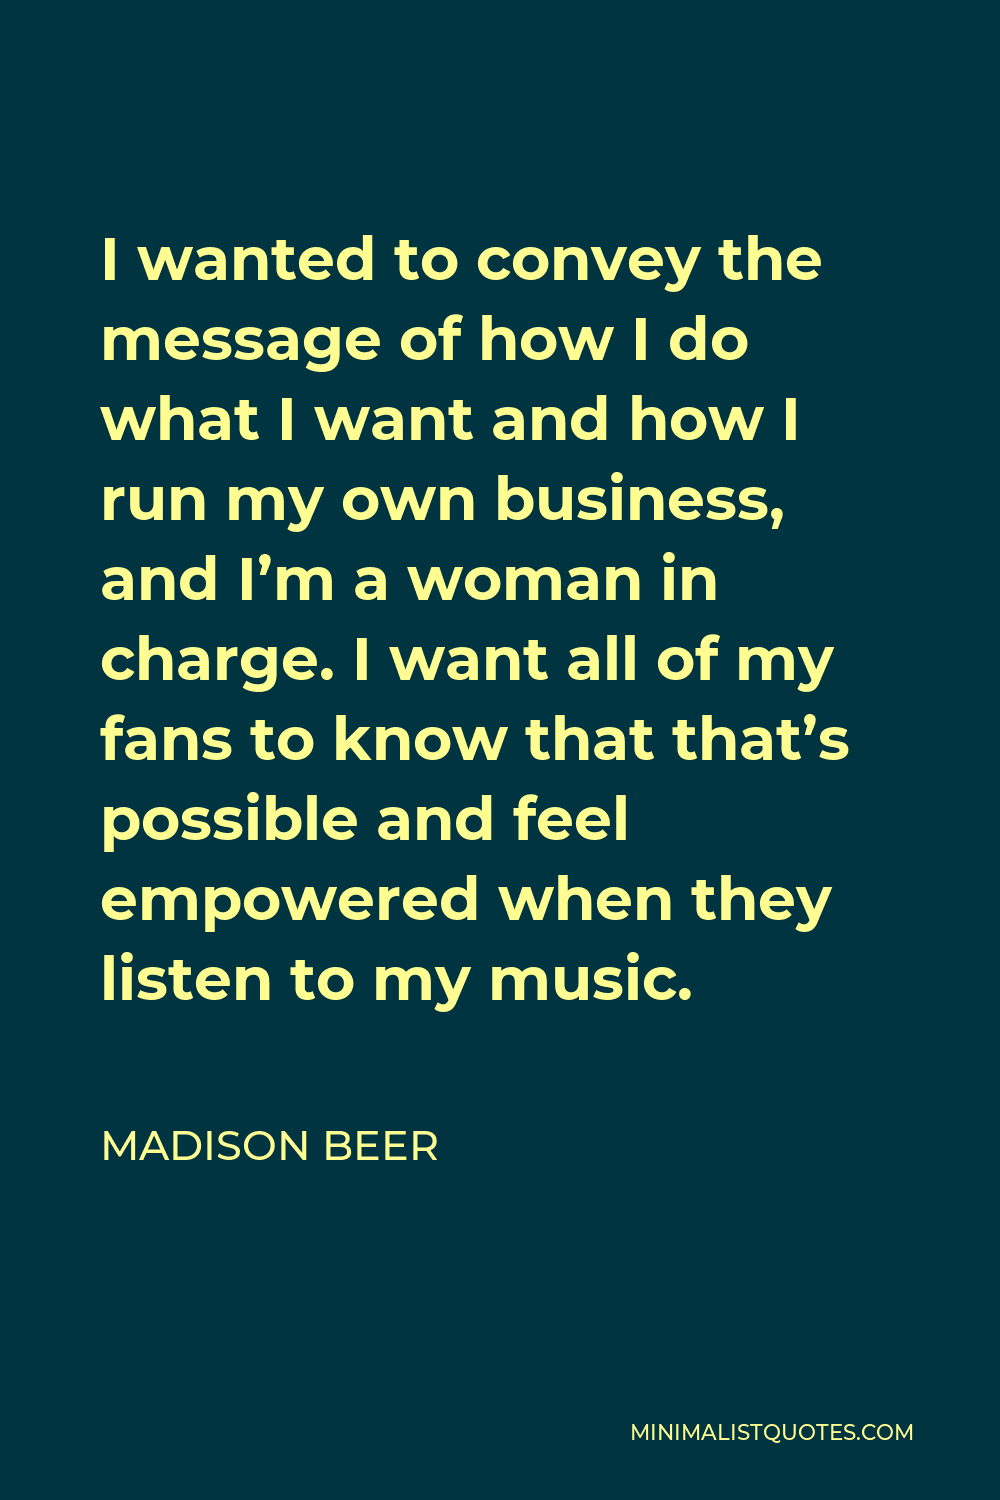 Madison Beer Quote - I wanted to convey the message of how I do what I want and how I run my own business, and I’m a woman in charge. I want all of my fans to know that that’s possible and feel empowered when they listen to my music.